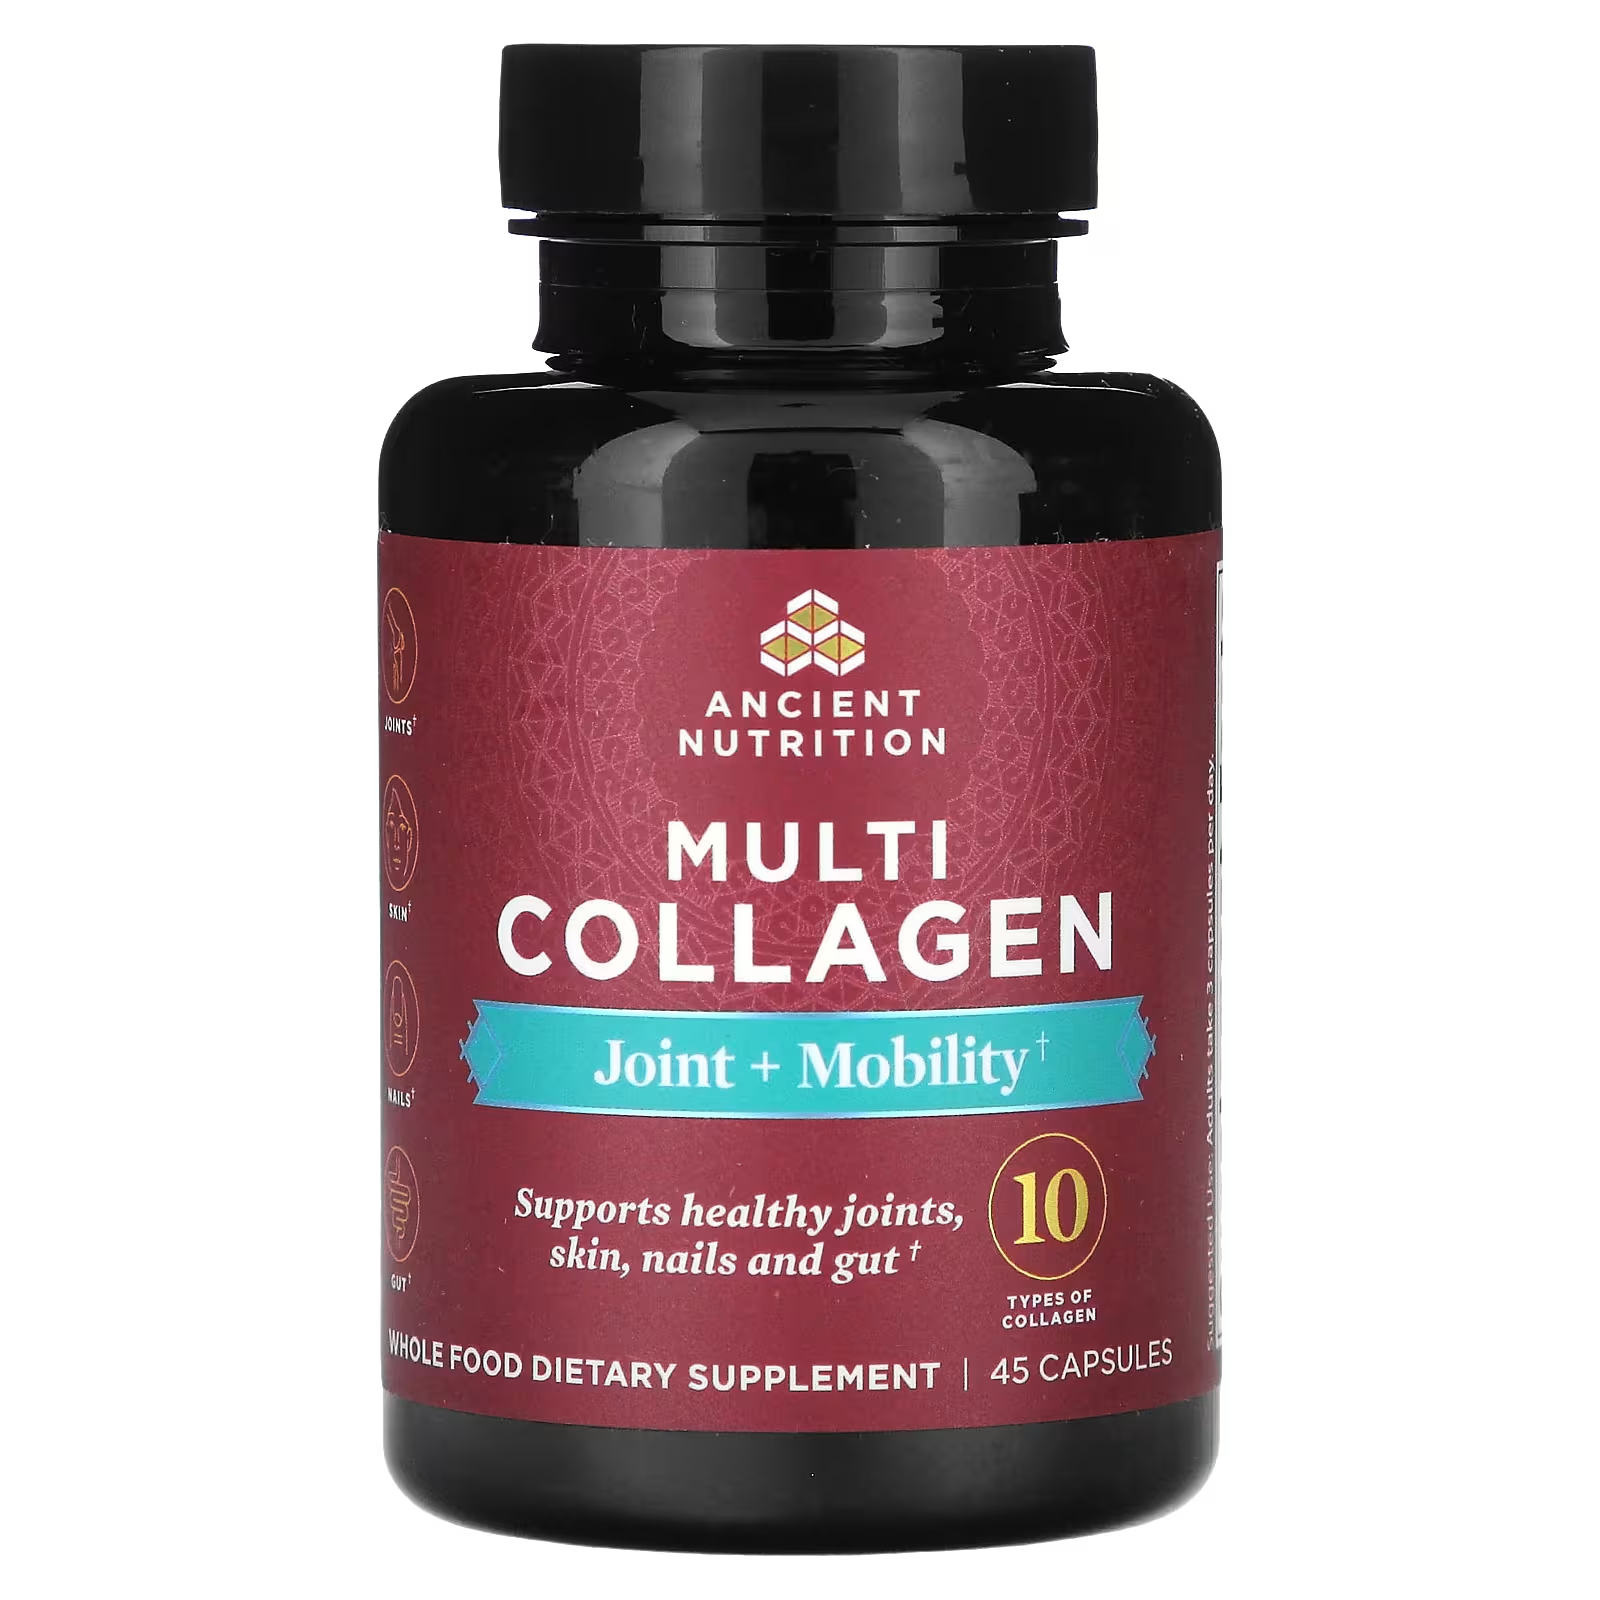 Пищевая добавка Ancient Nutrition Multi Collagen Joint + Mobility, 45 капсул dr axe ancient nutrition multi collagen joint mobility 45 капсул